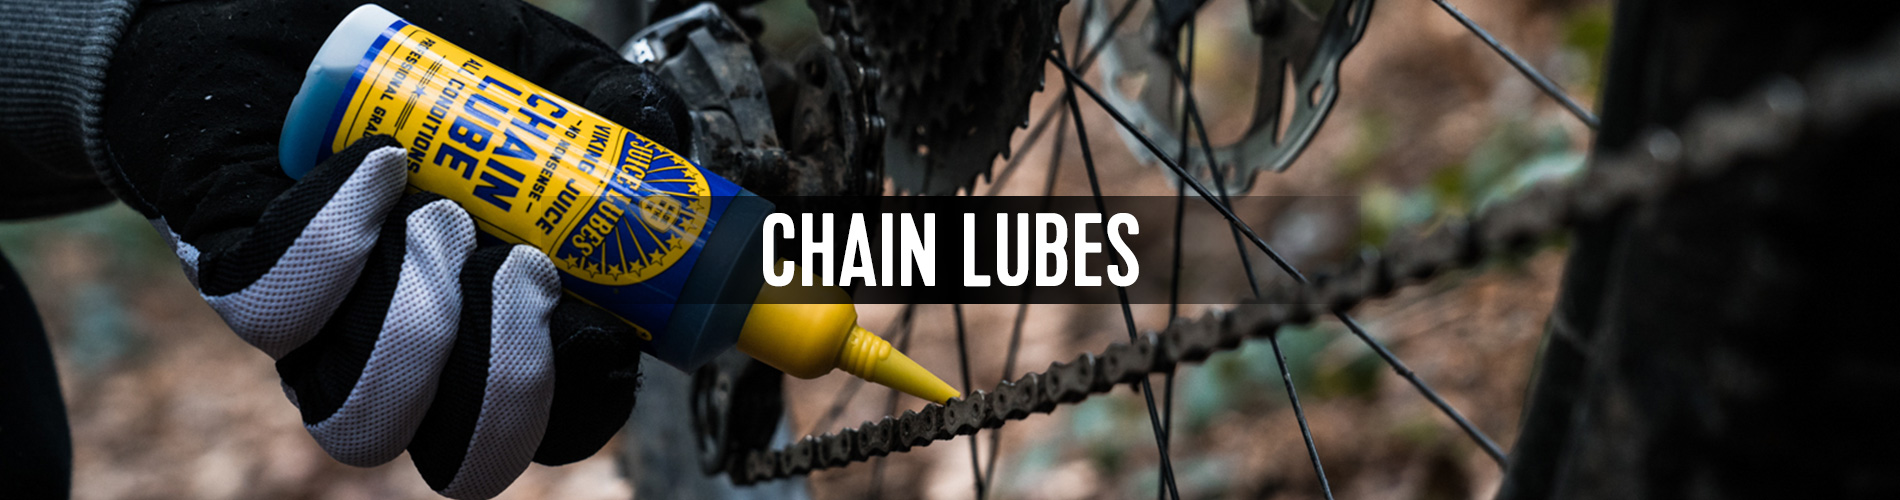 Chain Lubes